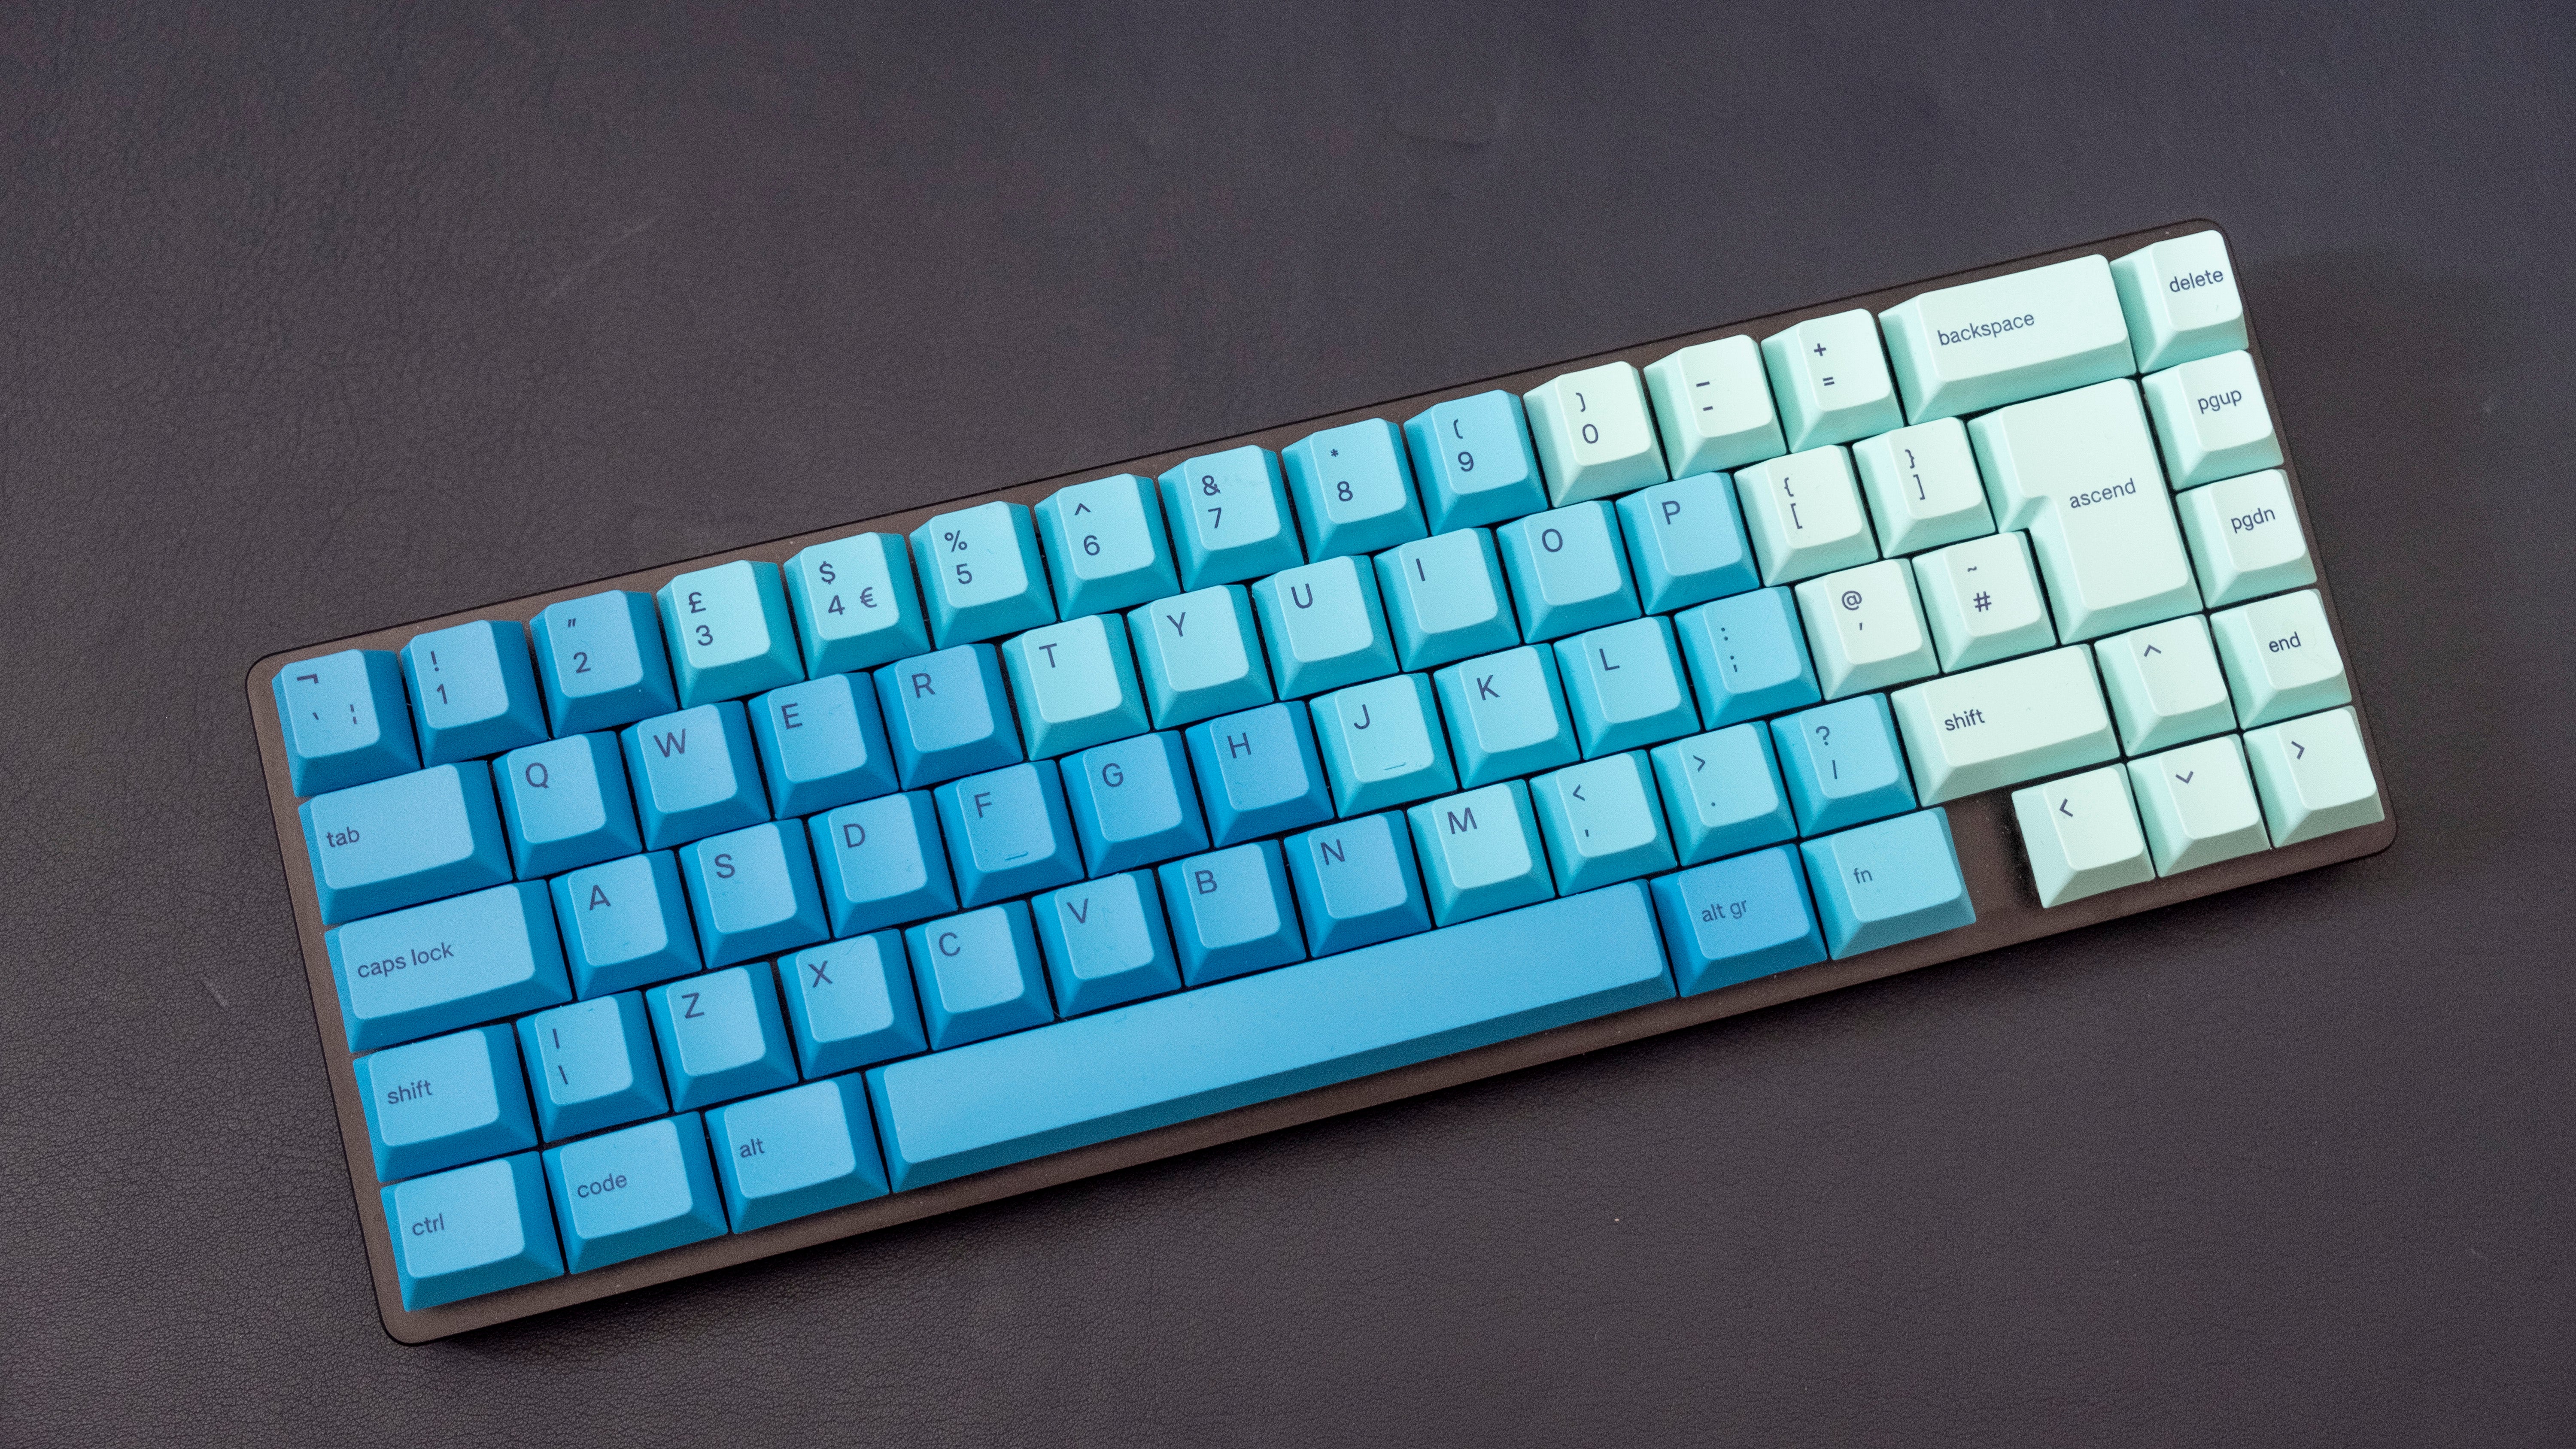 a customized glorious modular keyboard, the GMMK 2, with green and blue keycaps and a compact 65% layout